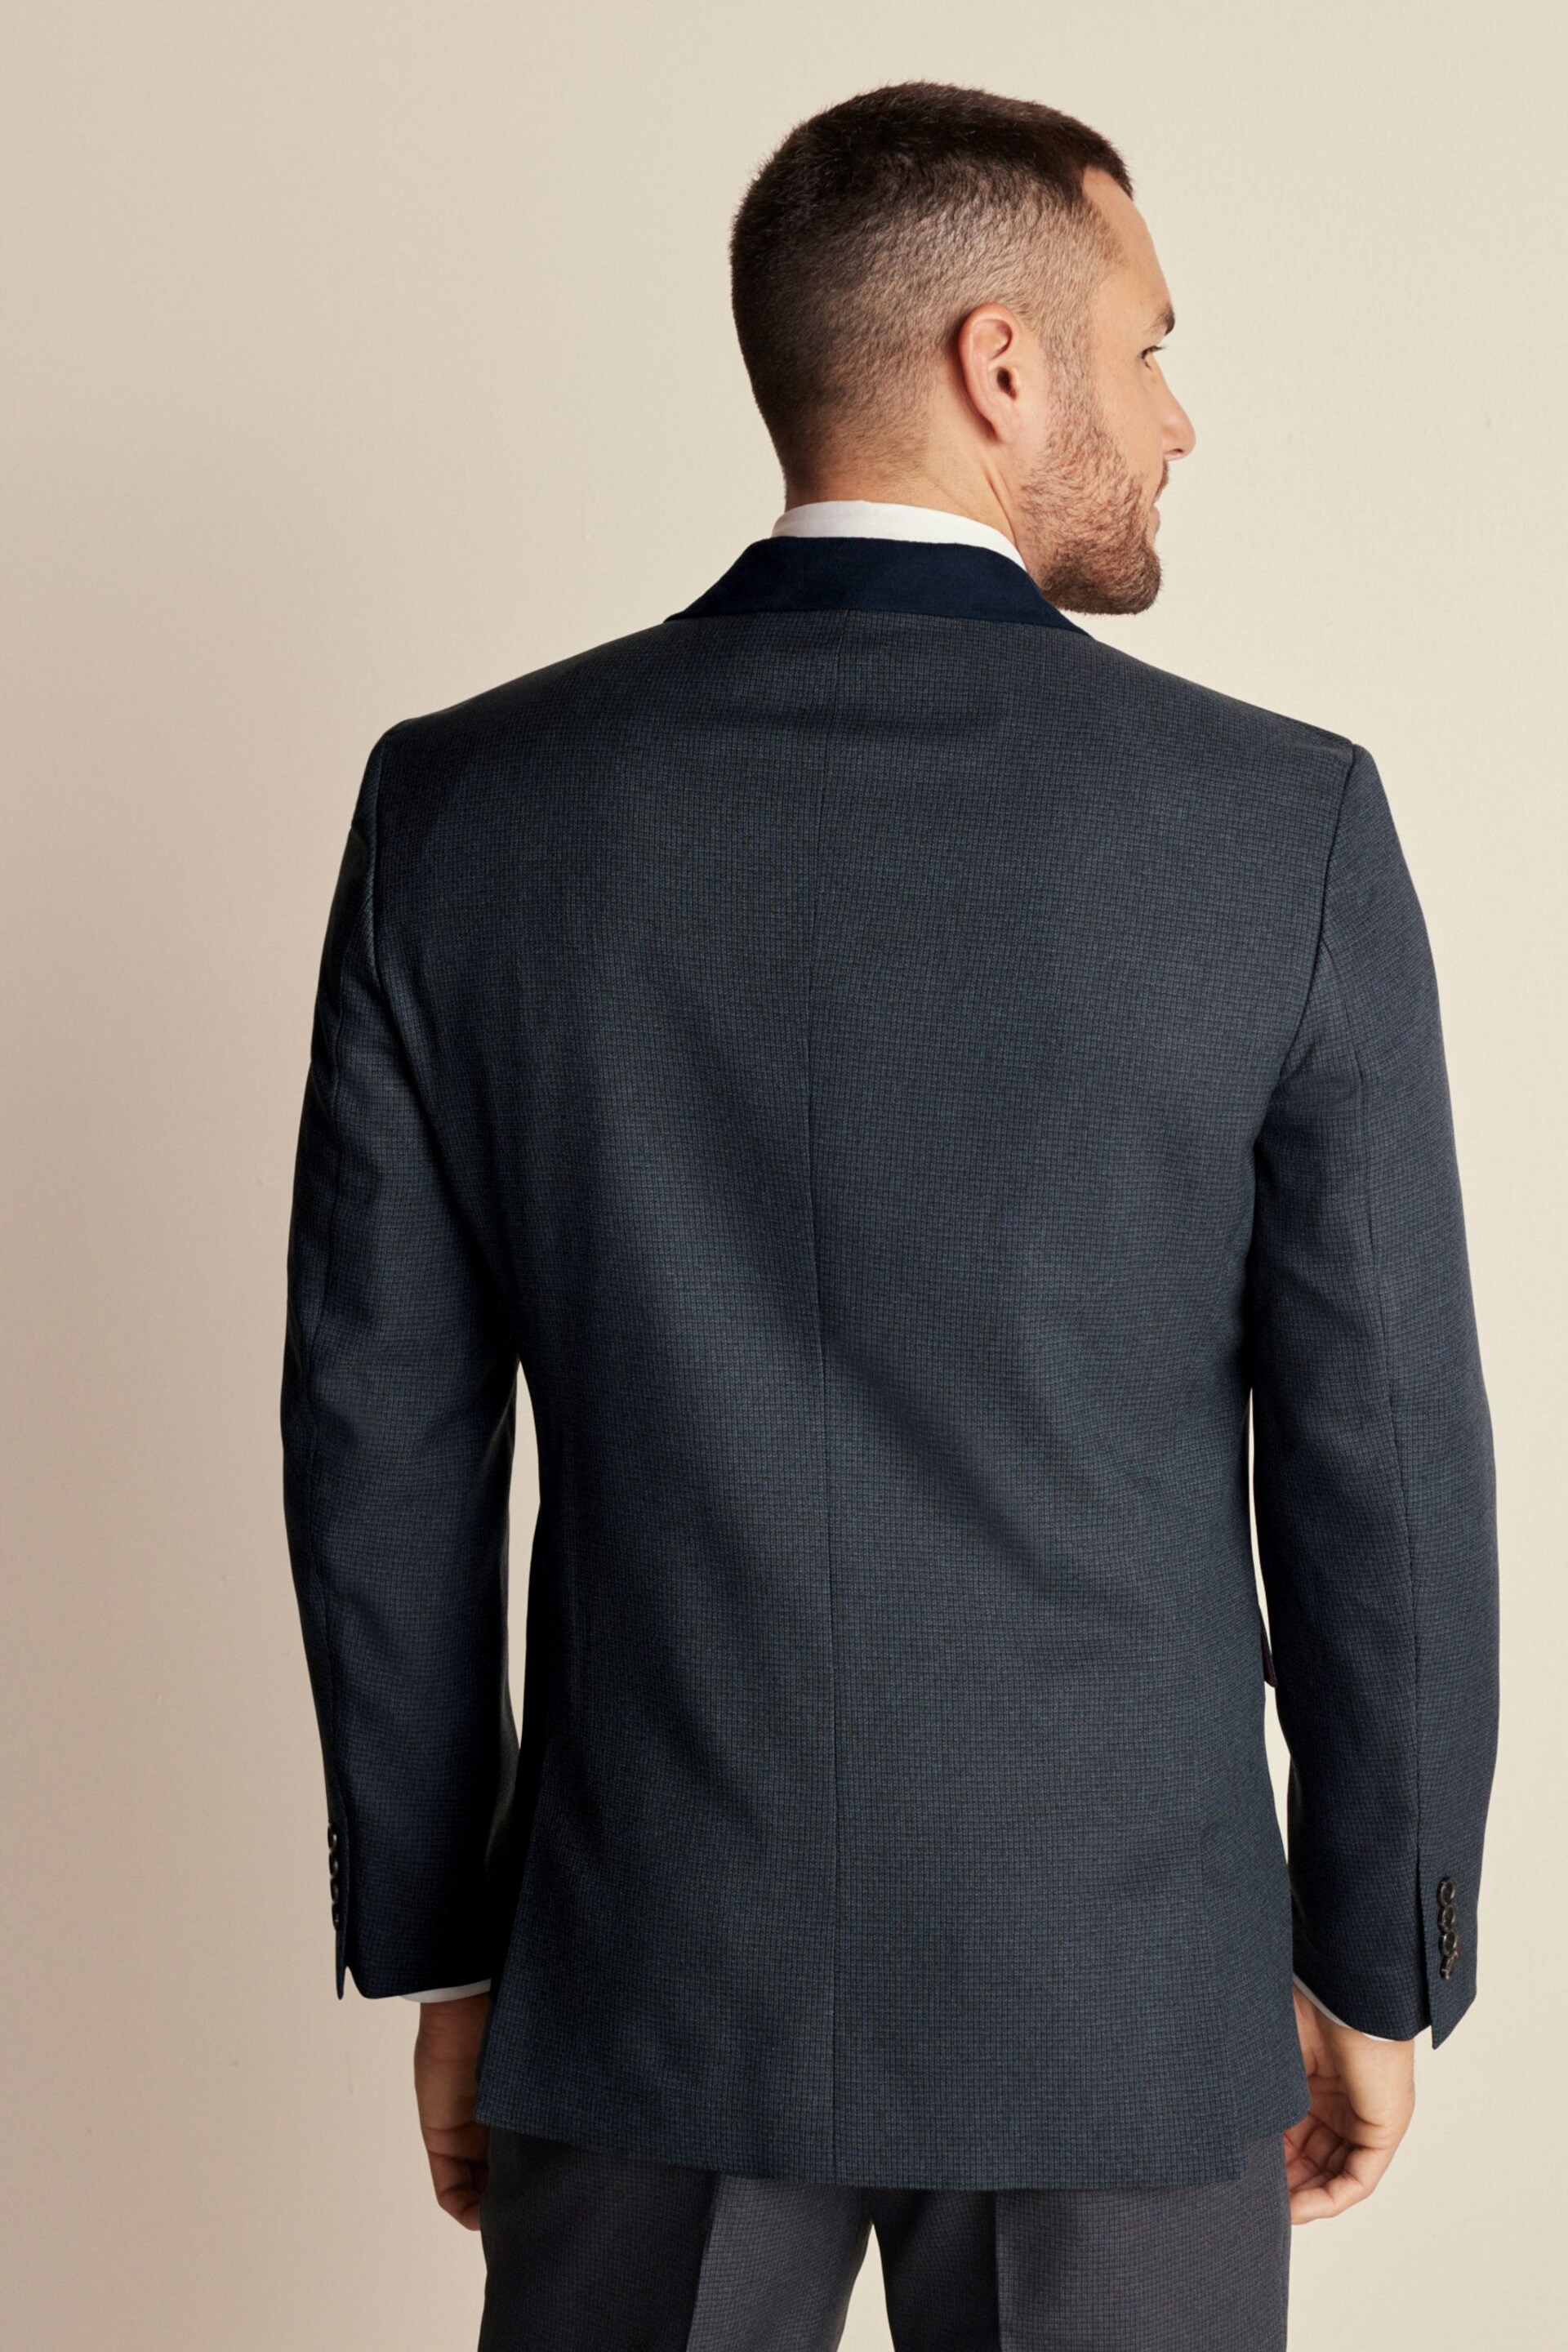 Navy Blue Trimmed Textured Suit Jacket - Image 4 of 12